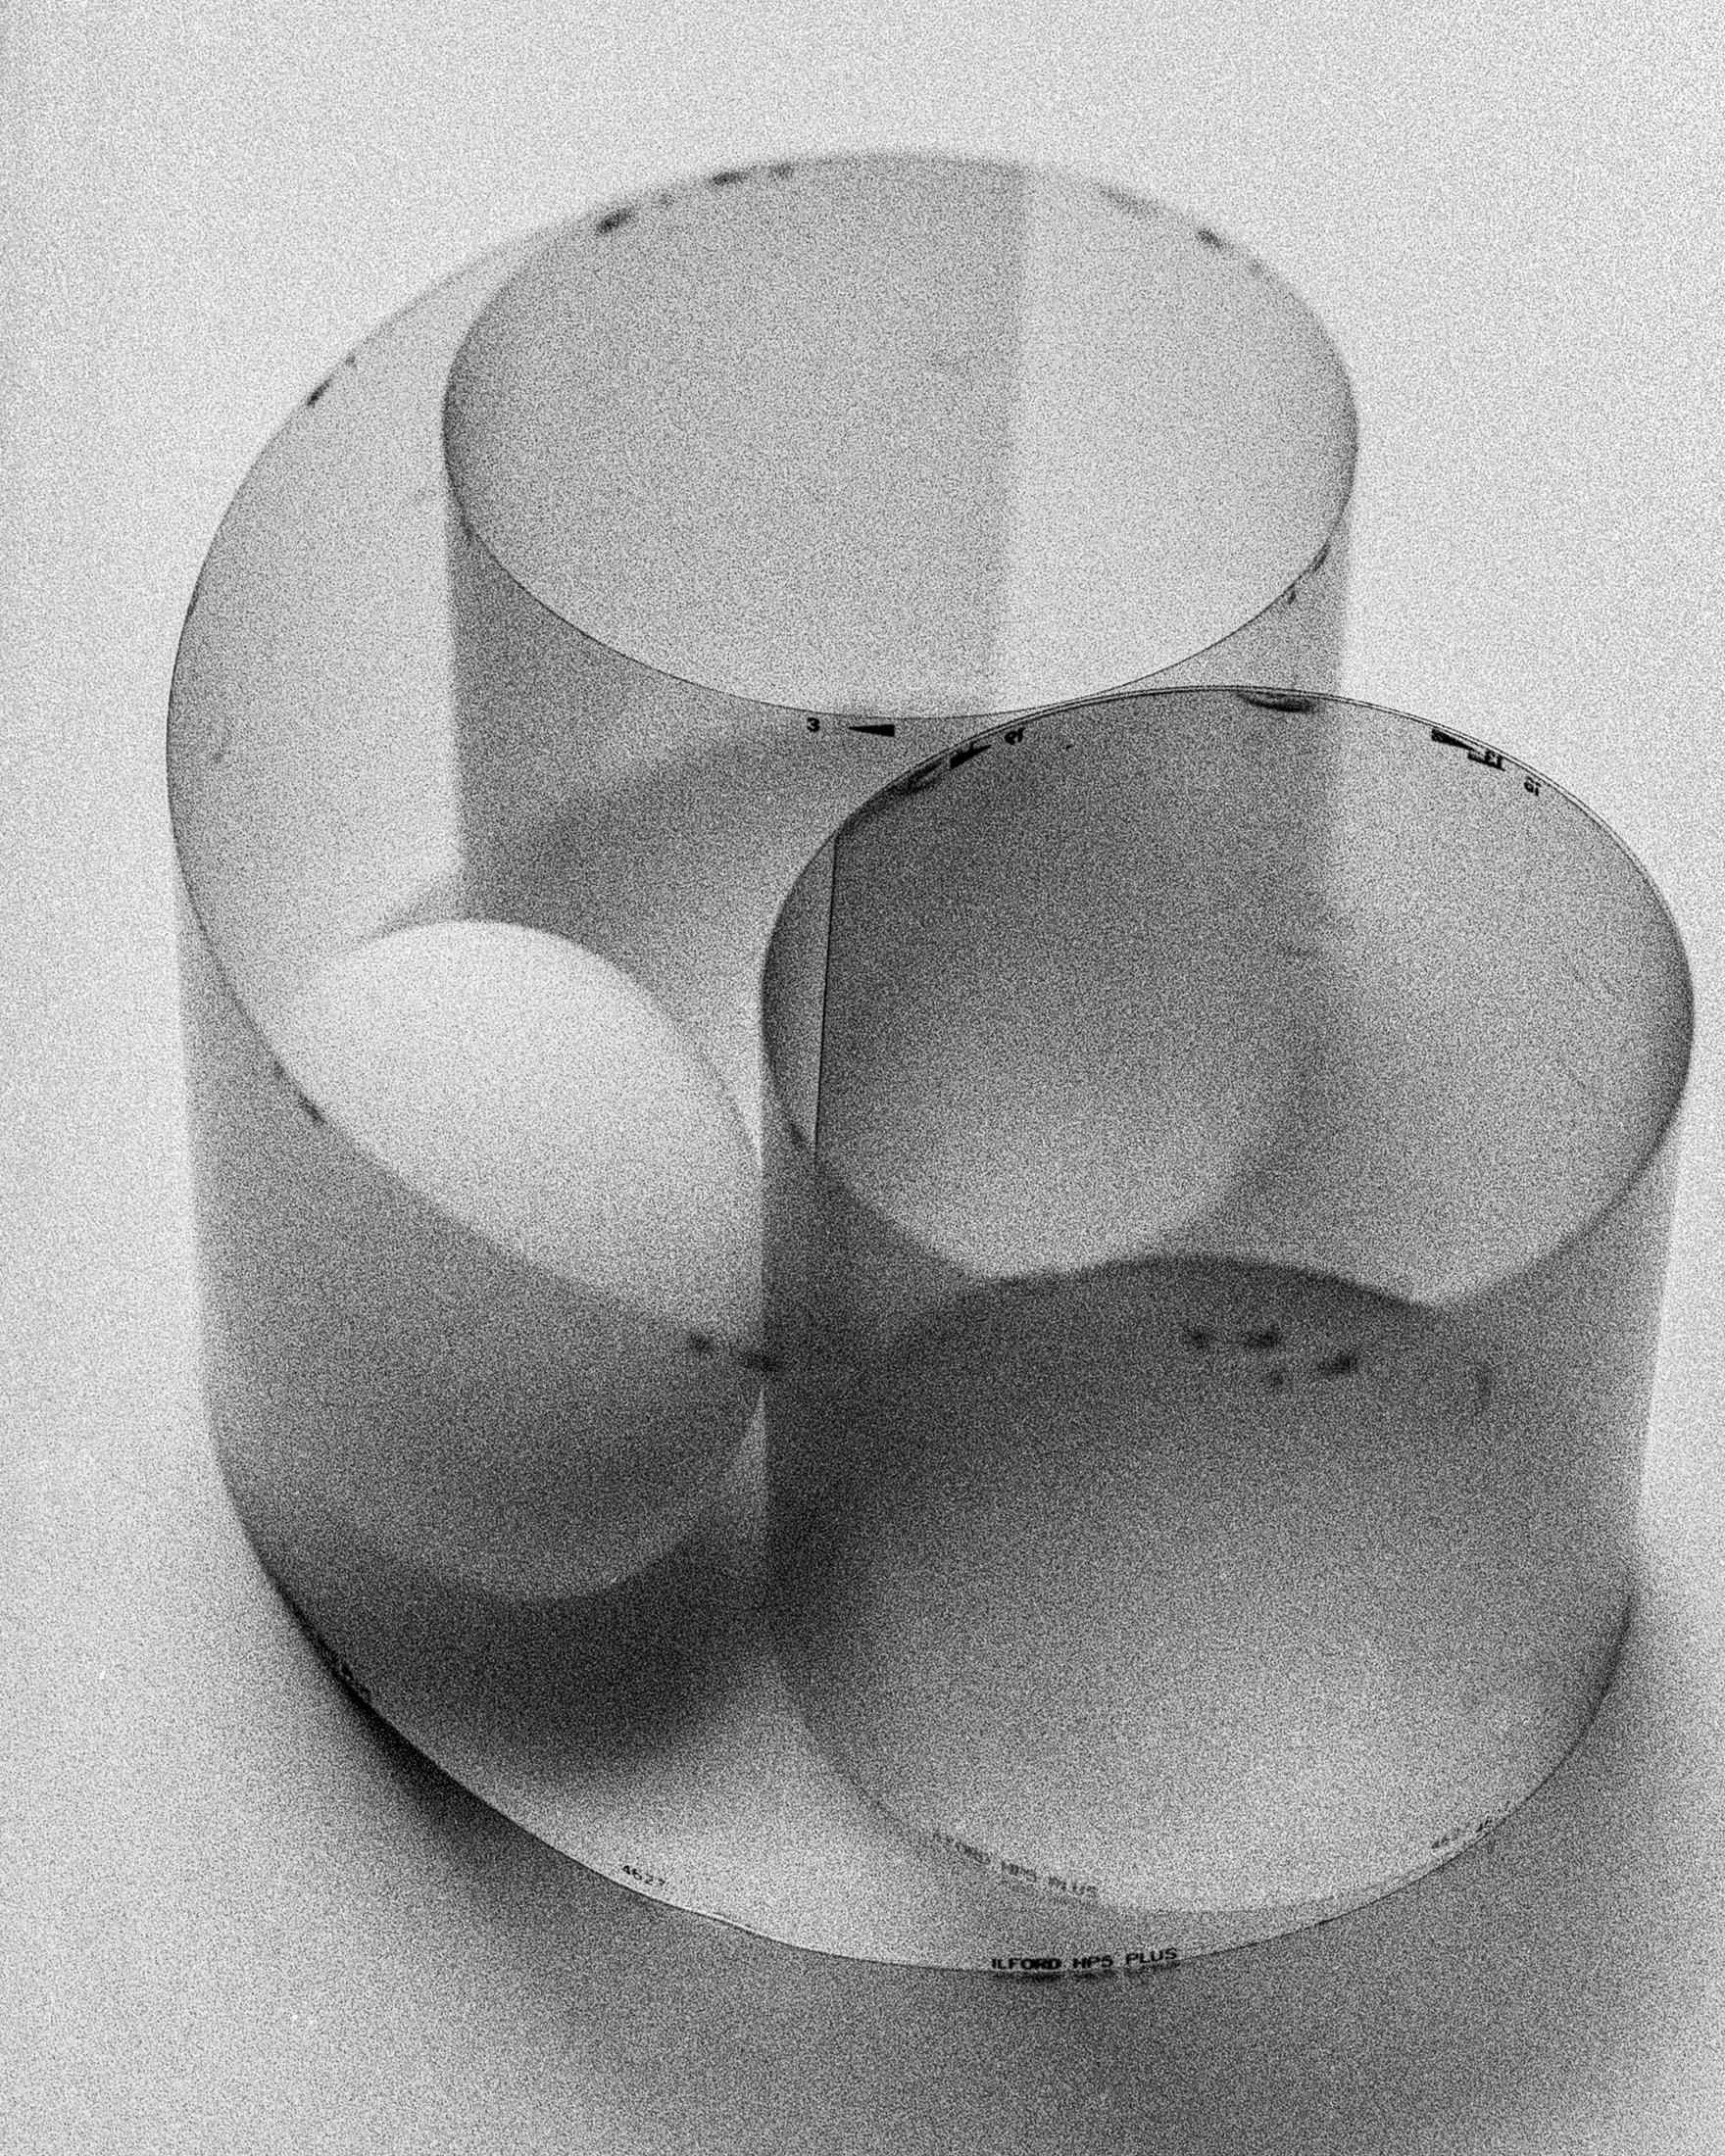 Shine Huang Abstract Photograph - Egg Study 8. Still Life . Black and White Silver Gelatin Print